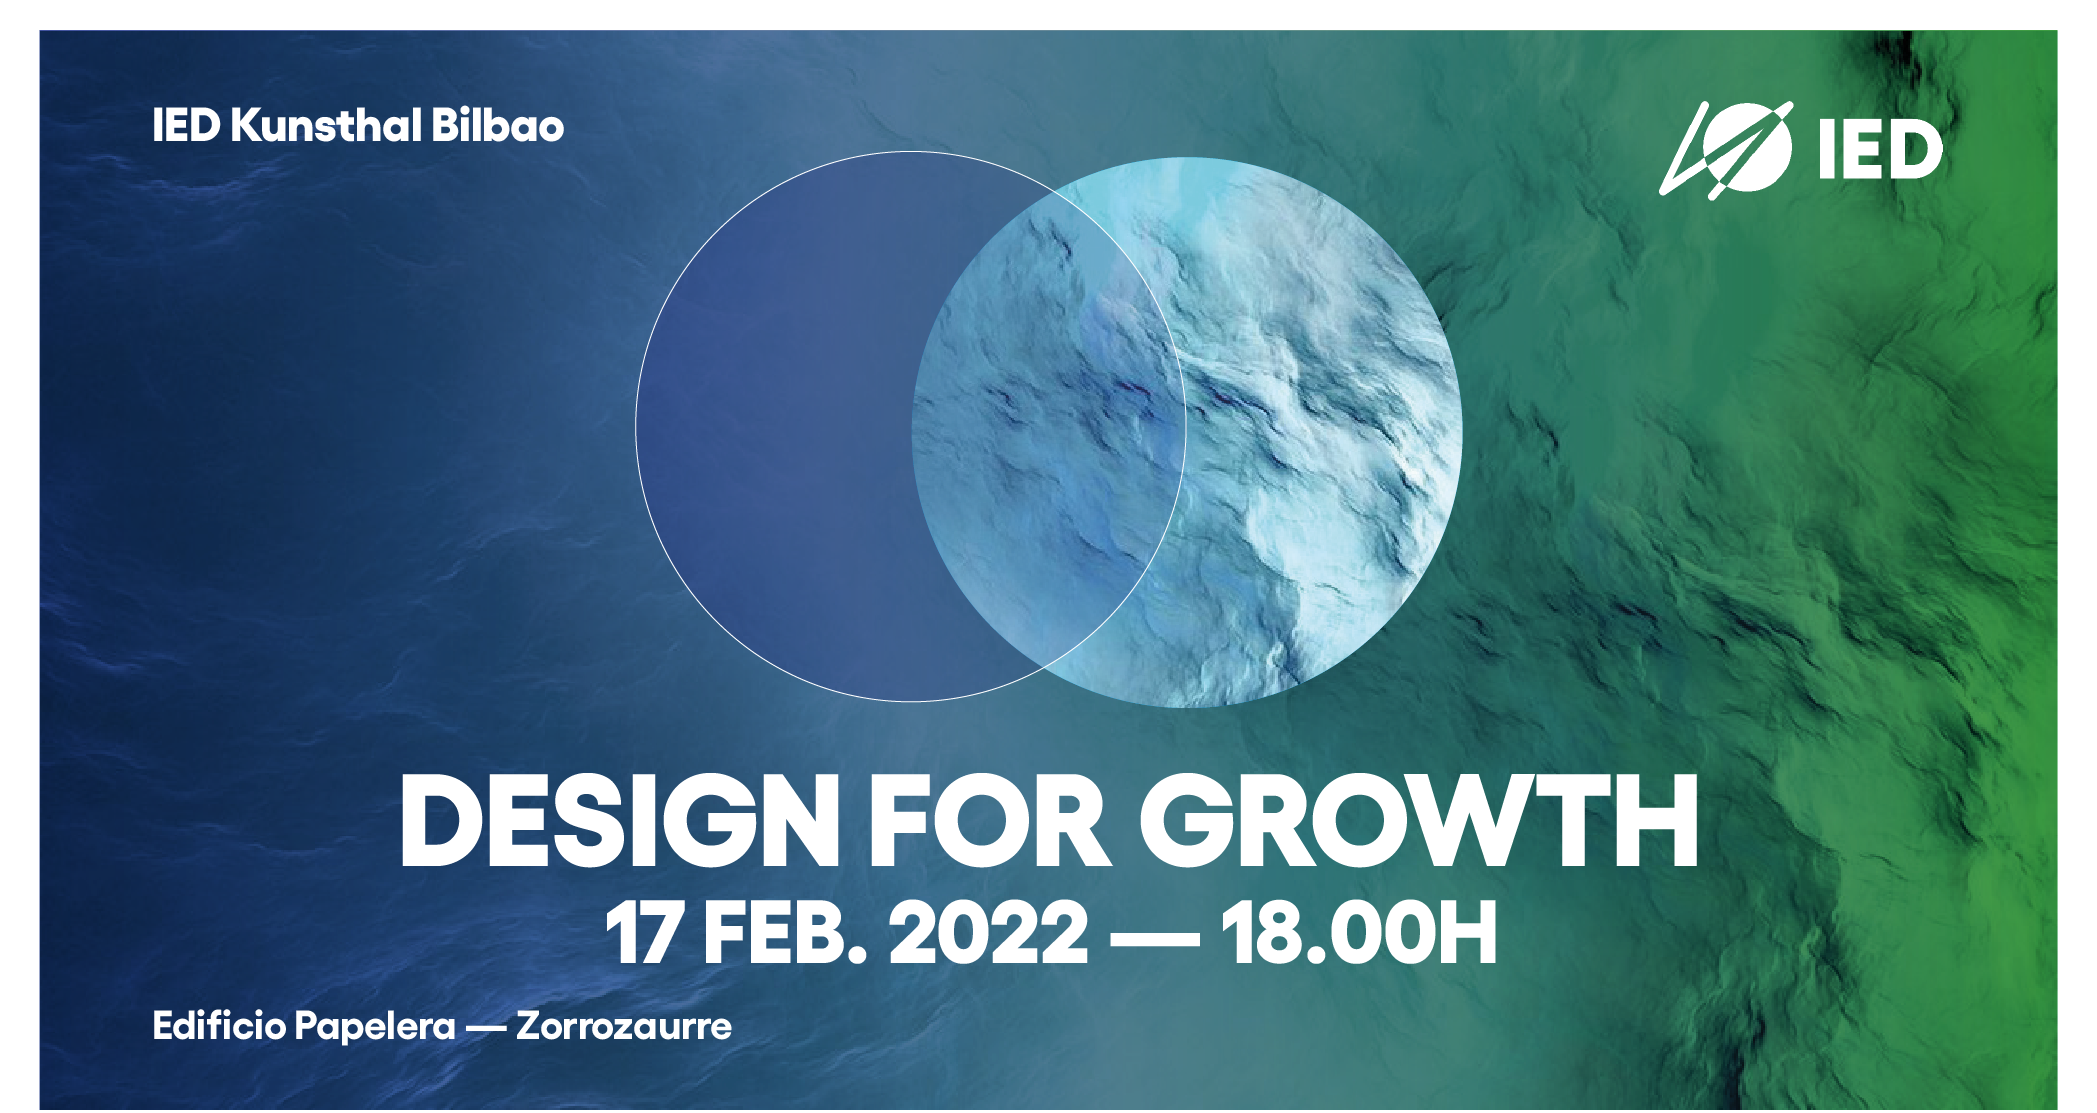 Design for Growth